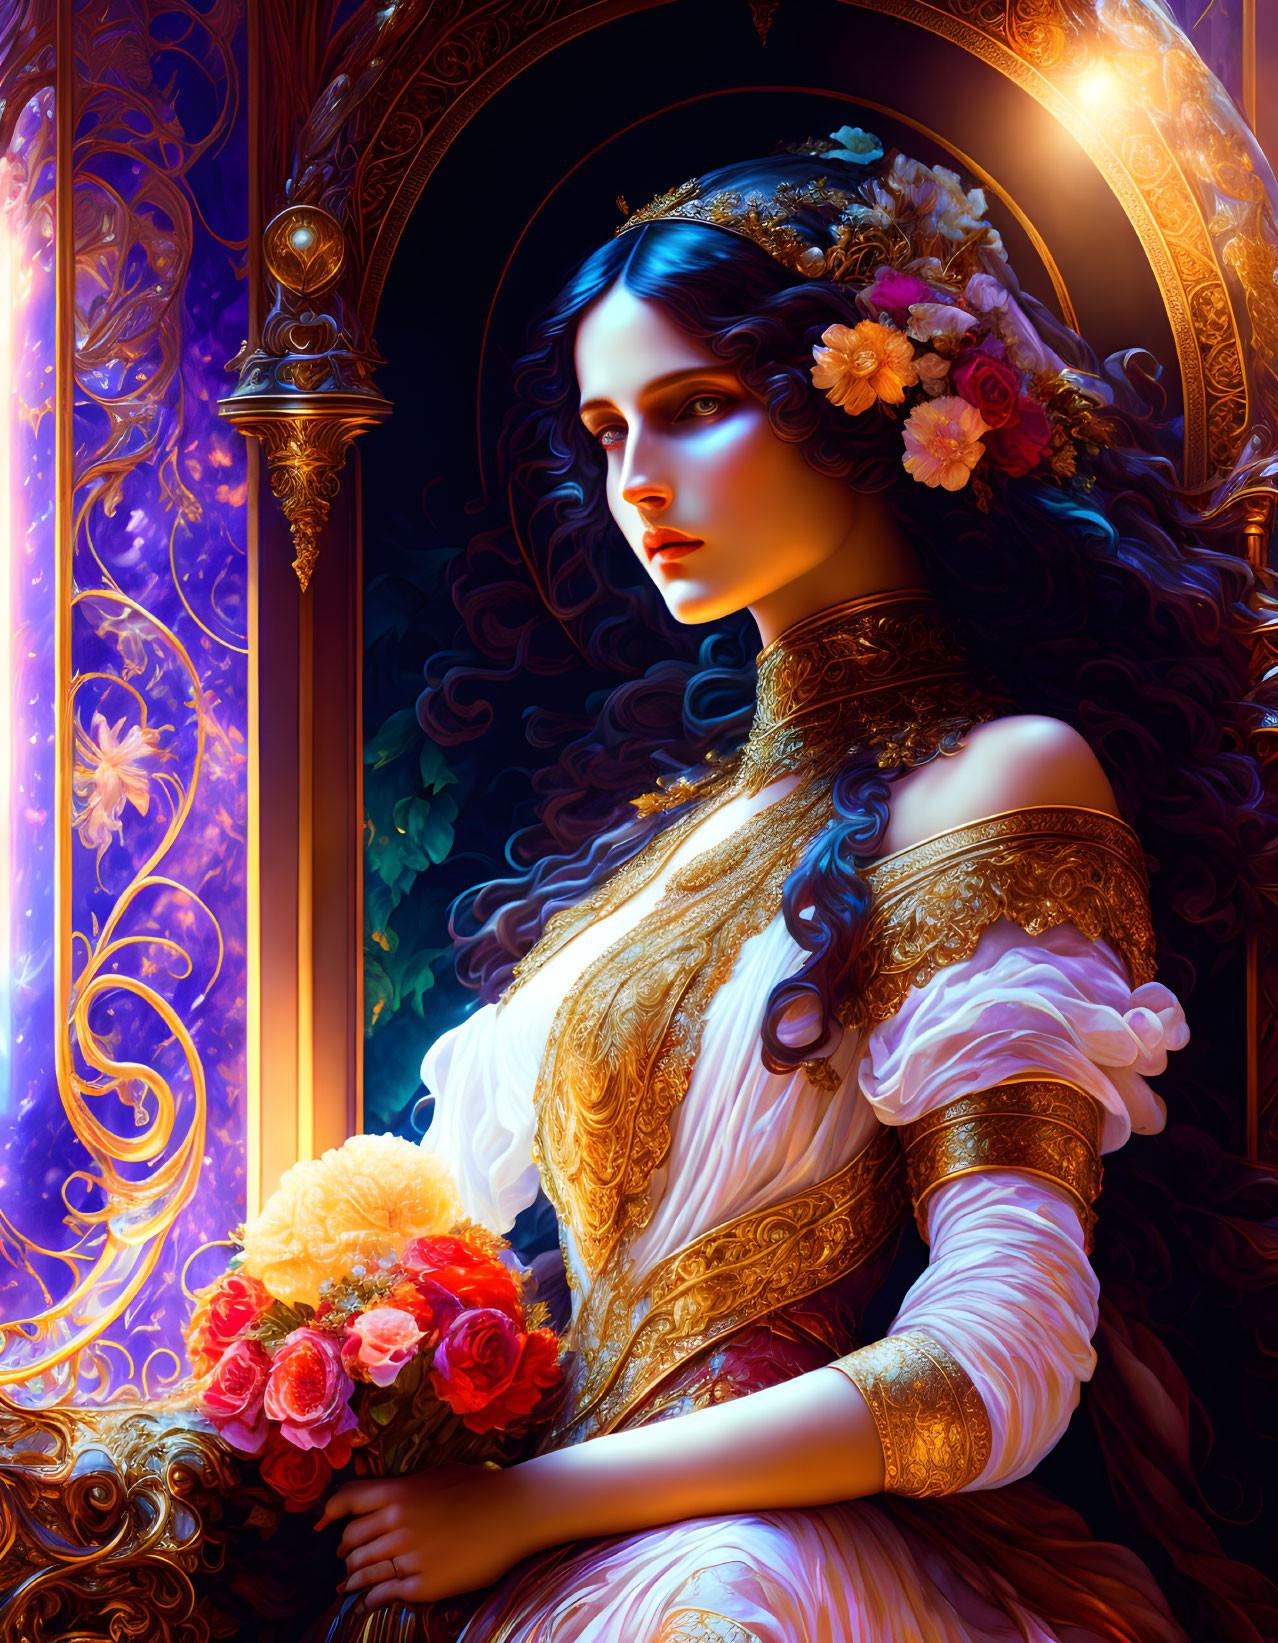 Regal woman in golden gown with flowers, framed by ornate arch with blue motifs